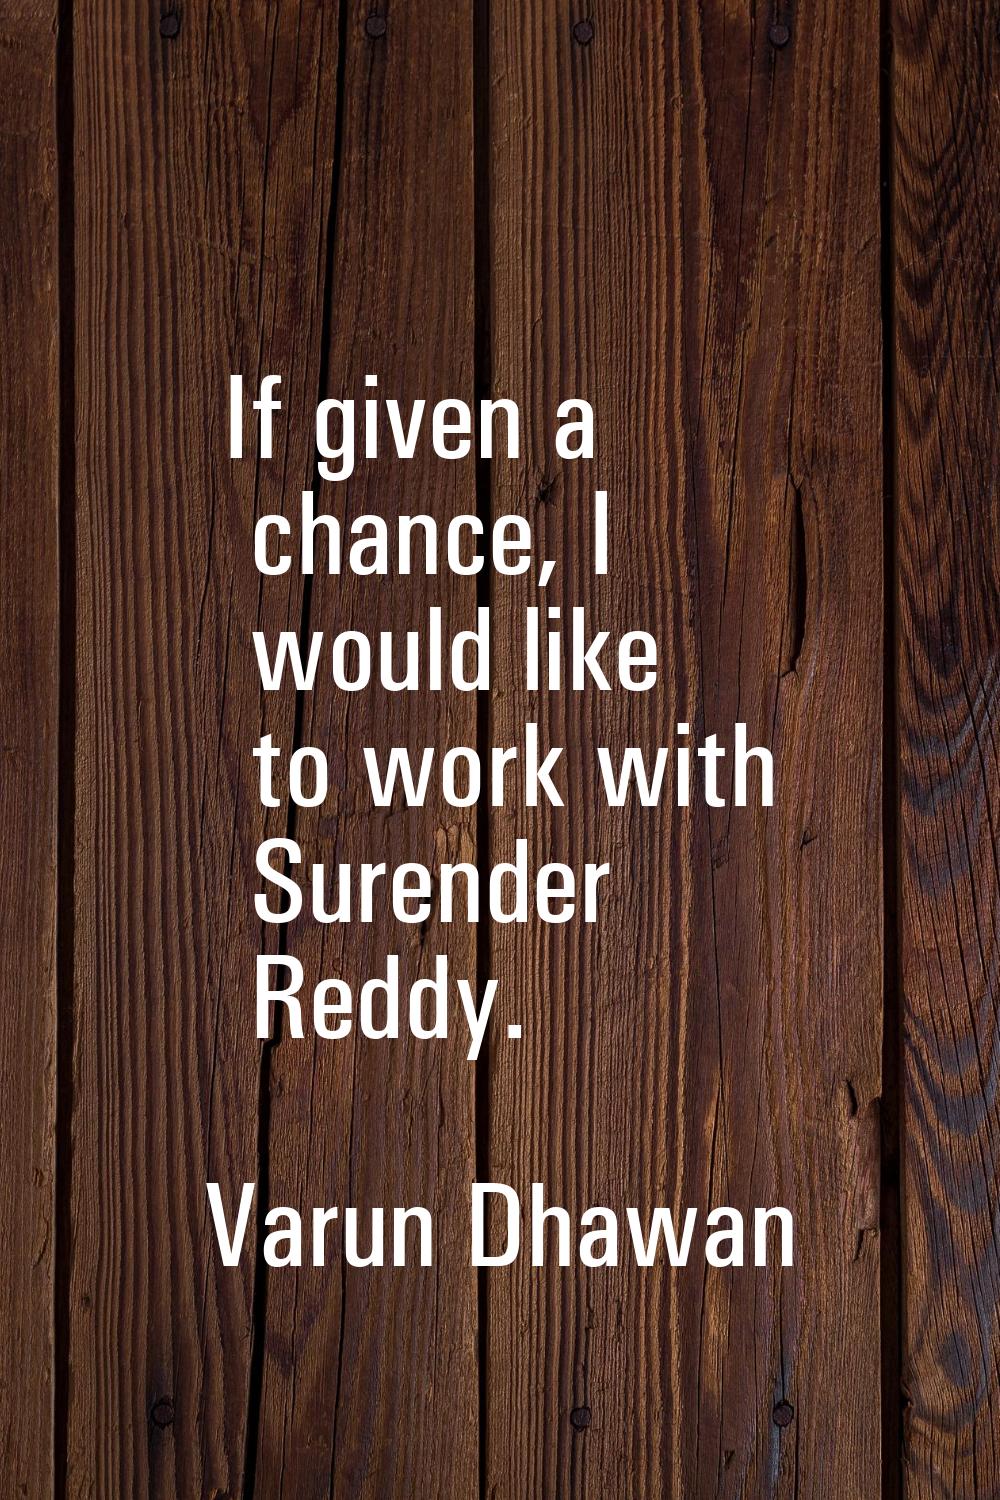 If given a chance, I would like to work with Surender Reddy.